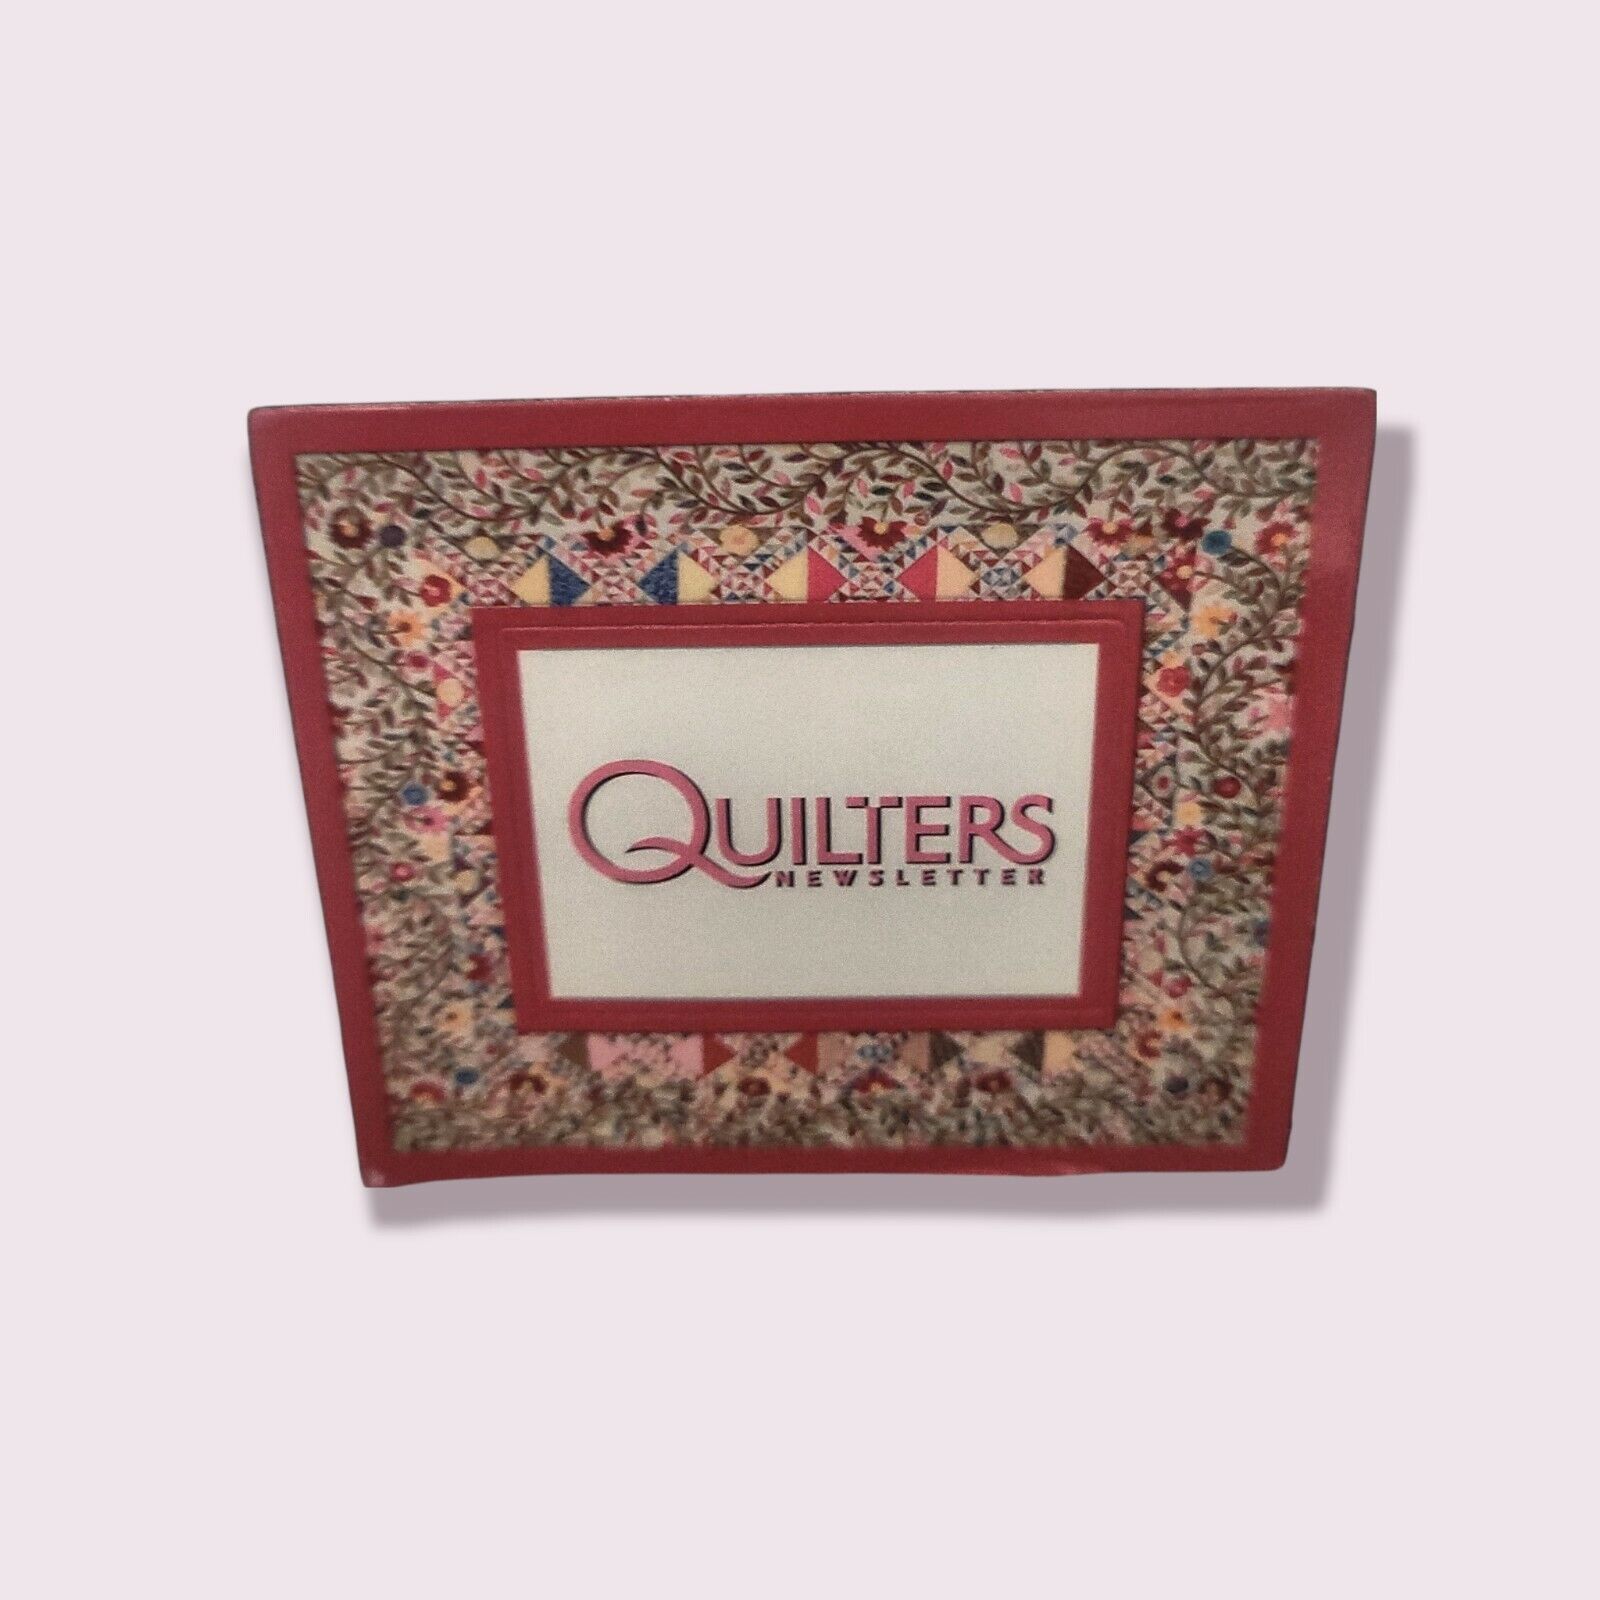 Quilters Newsletter Magnet - Flexible Fridge Quilting Crafts Crafters 2 In 1